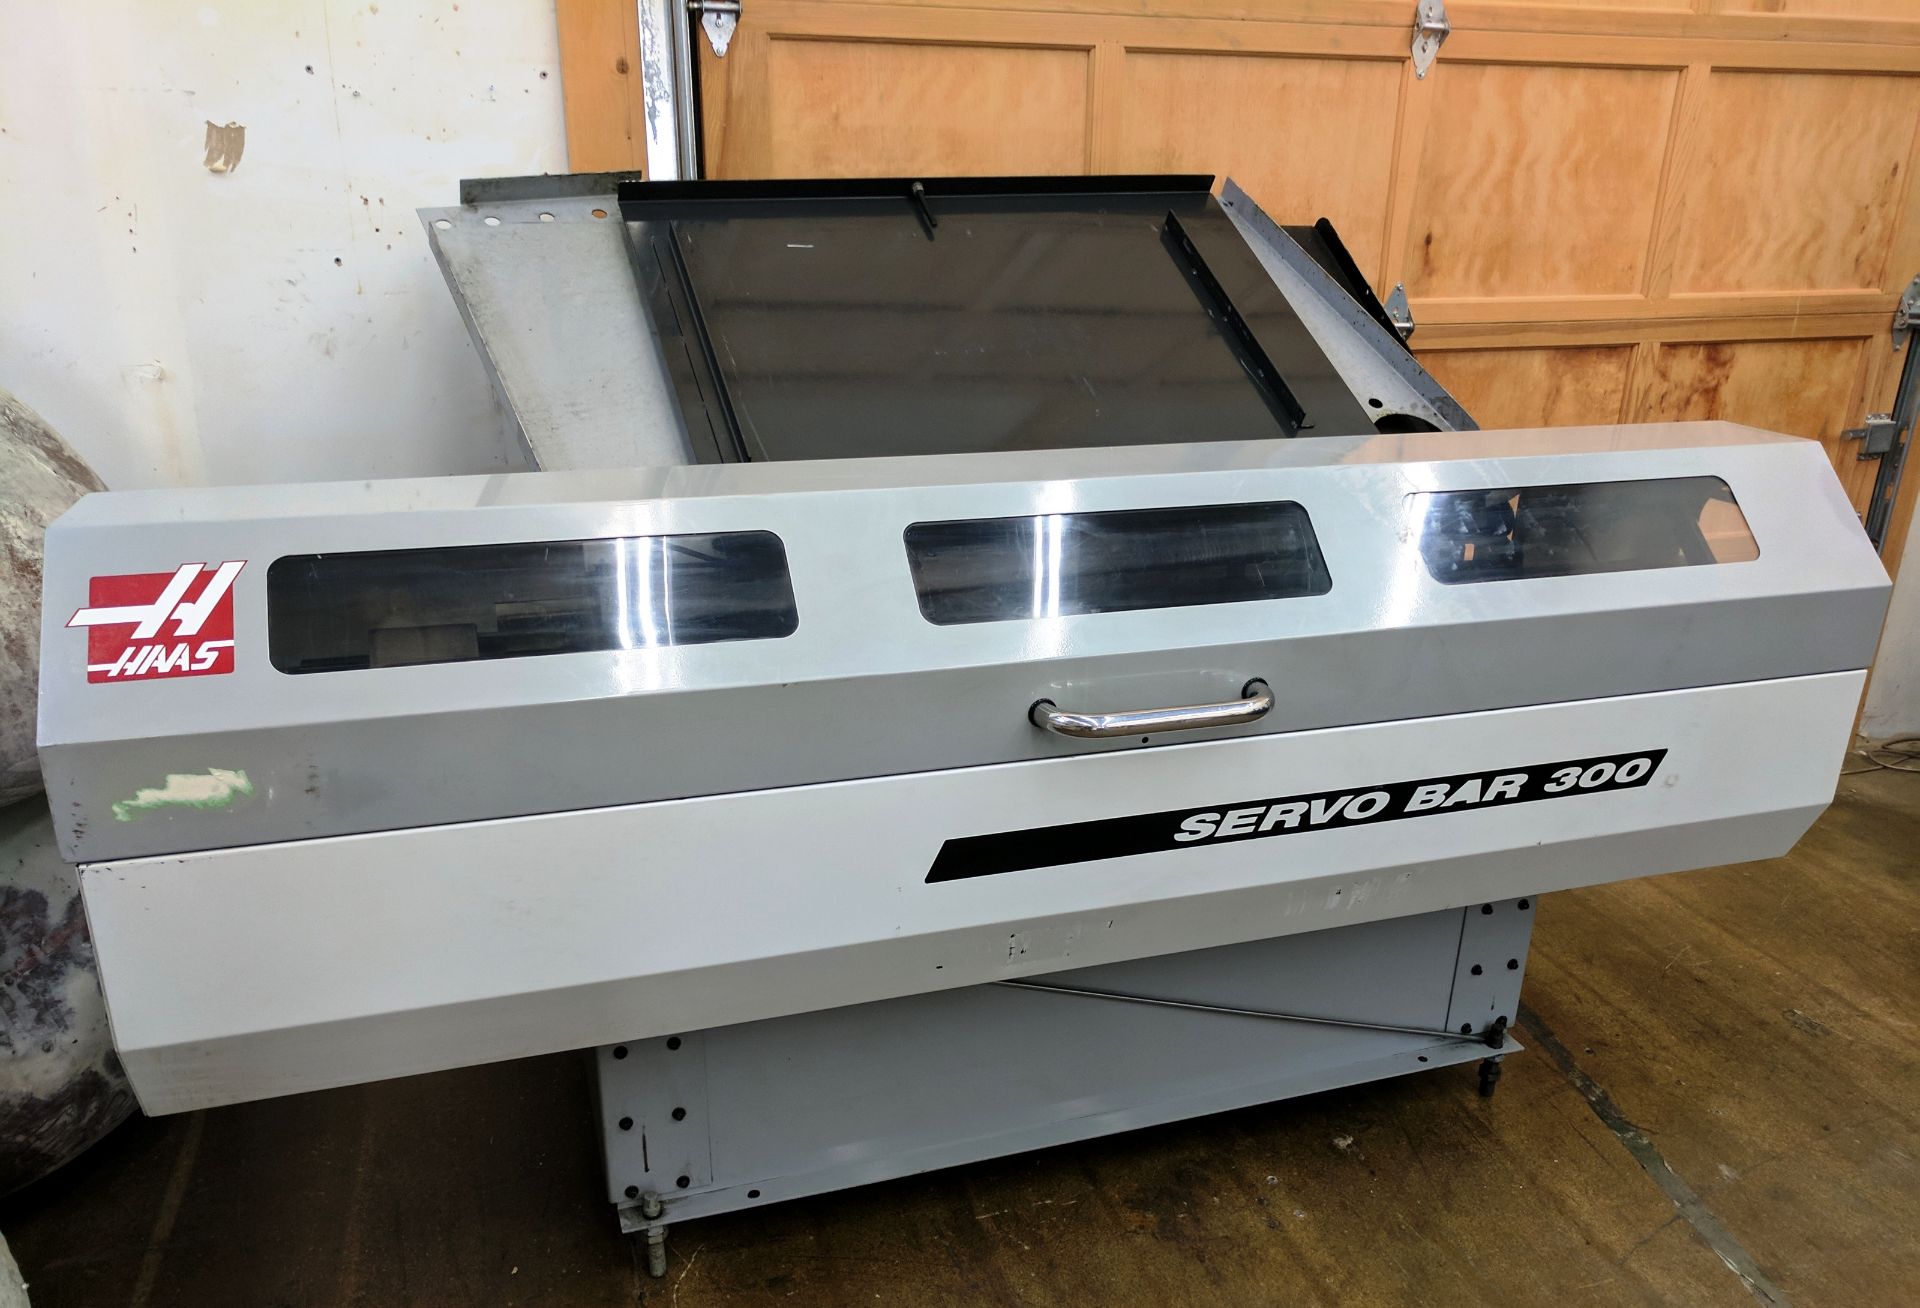 HAAS SERVO BAR 300 AUTOMATIC BAR FEEDER, S/N: 91769 (LOCATED AT 5476 GORVAN DR, MISSISSAUGA, ON) (